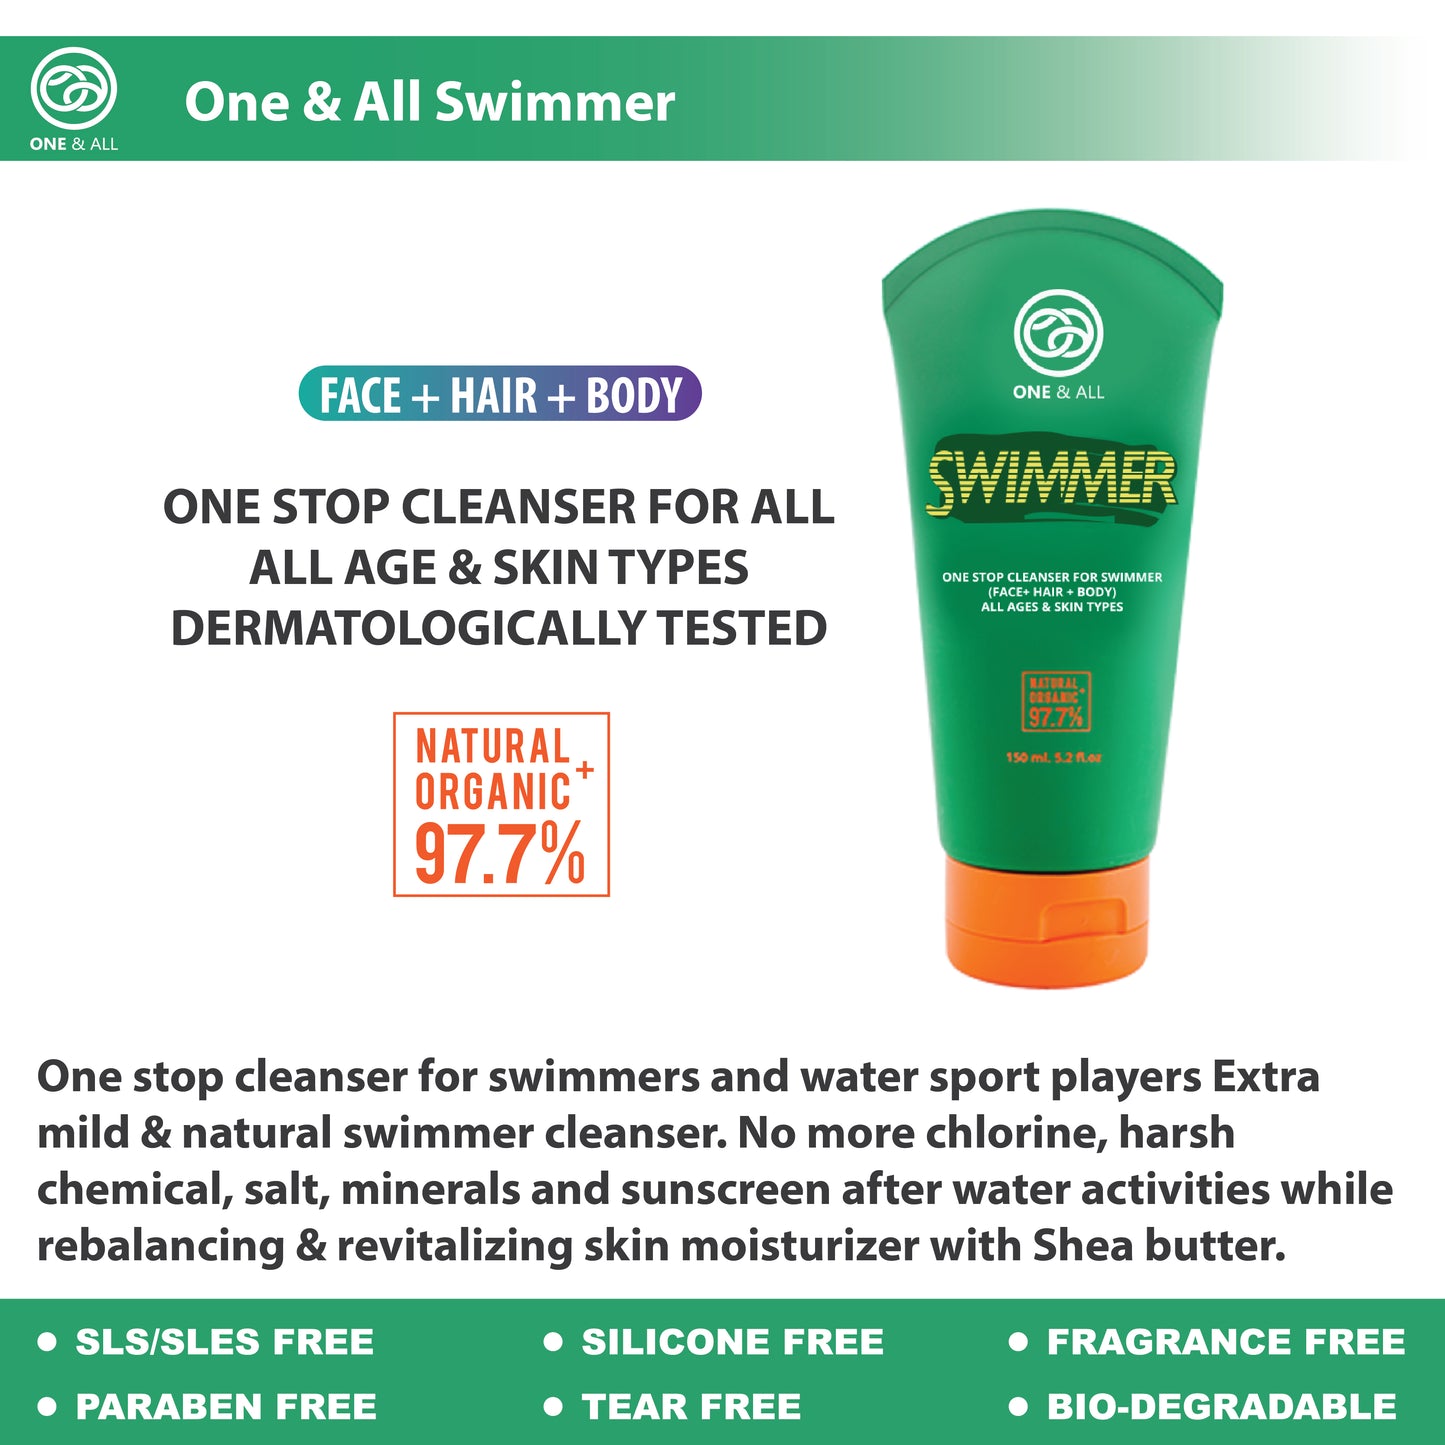 One & All Swimmer 150ml